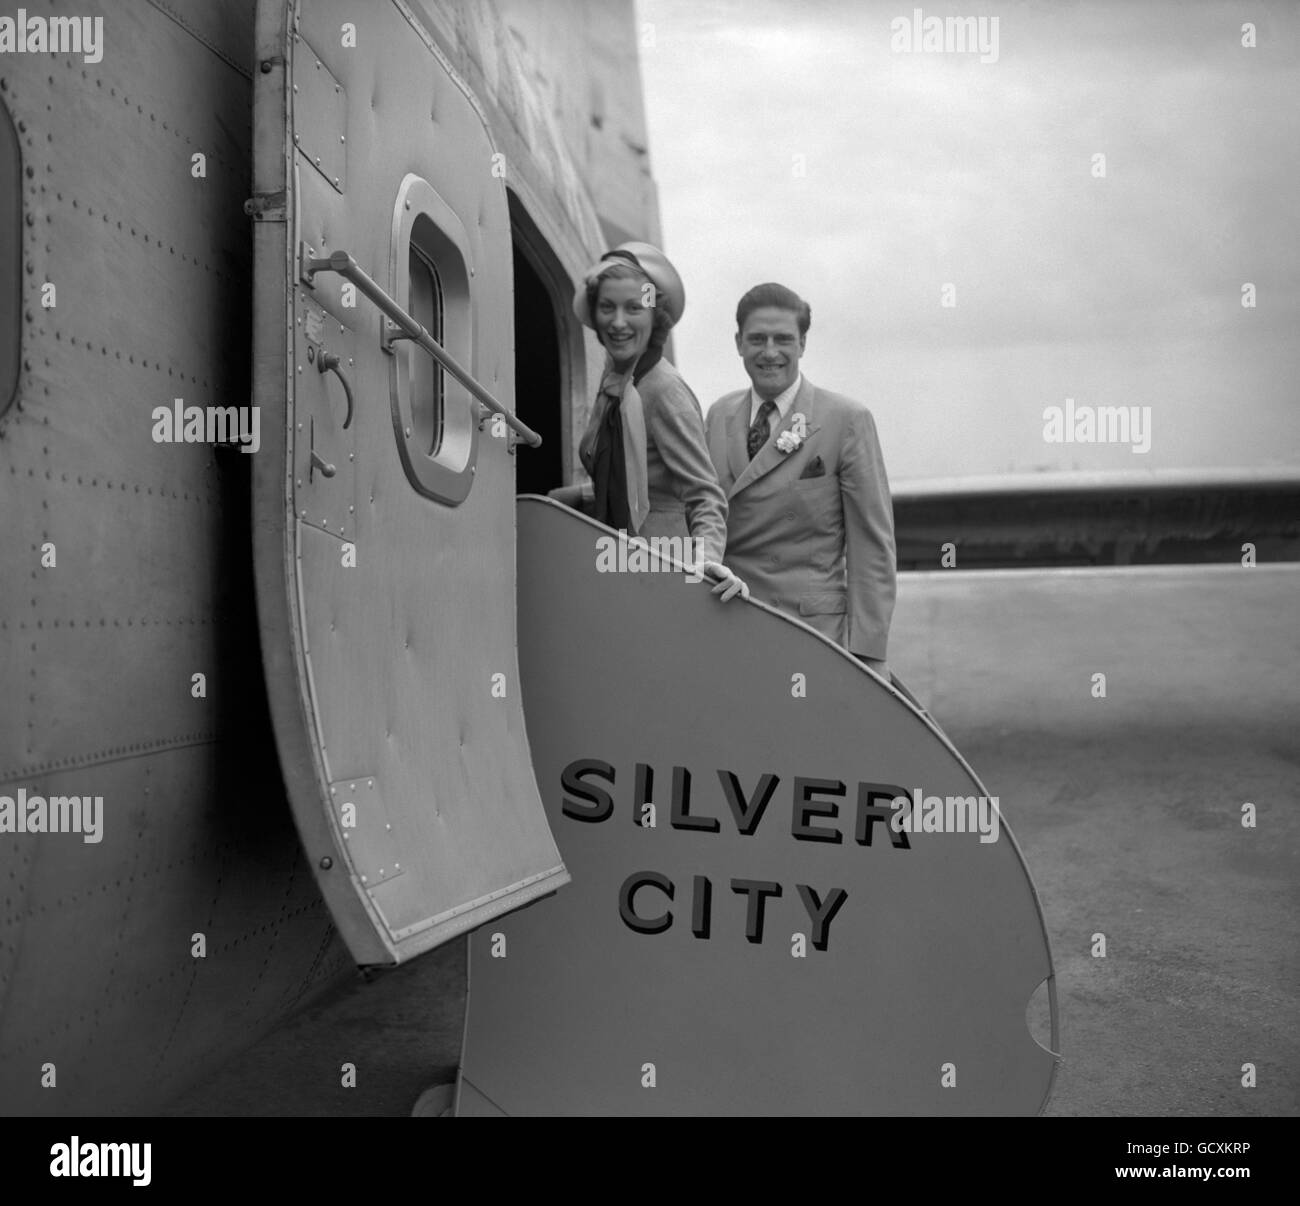 The Honorable Gerald Lascelles, younger son of the Princess Royal and cousin of the Queen, with his bride Angela Dowding, boarding a Silver City air freighter for Le Touquet, on the first stage of their motoring honeymoon on the Continent. Stock Photo